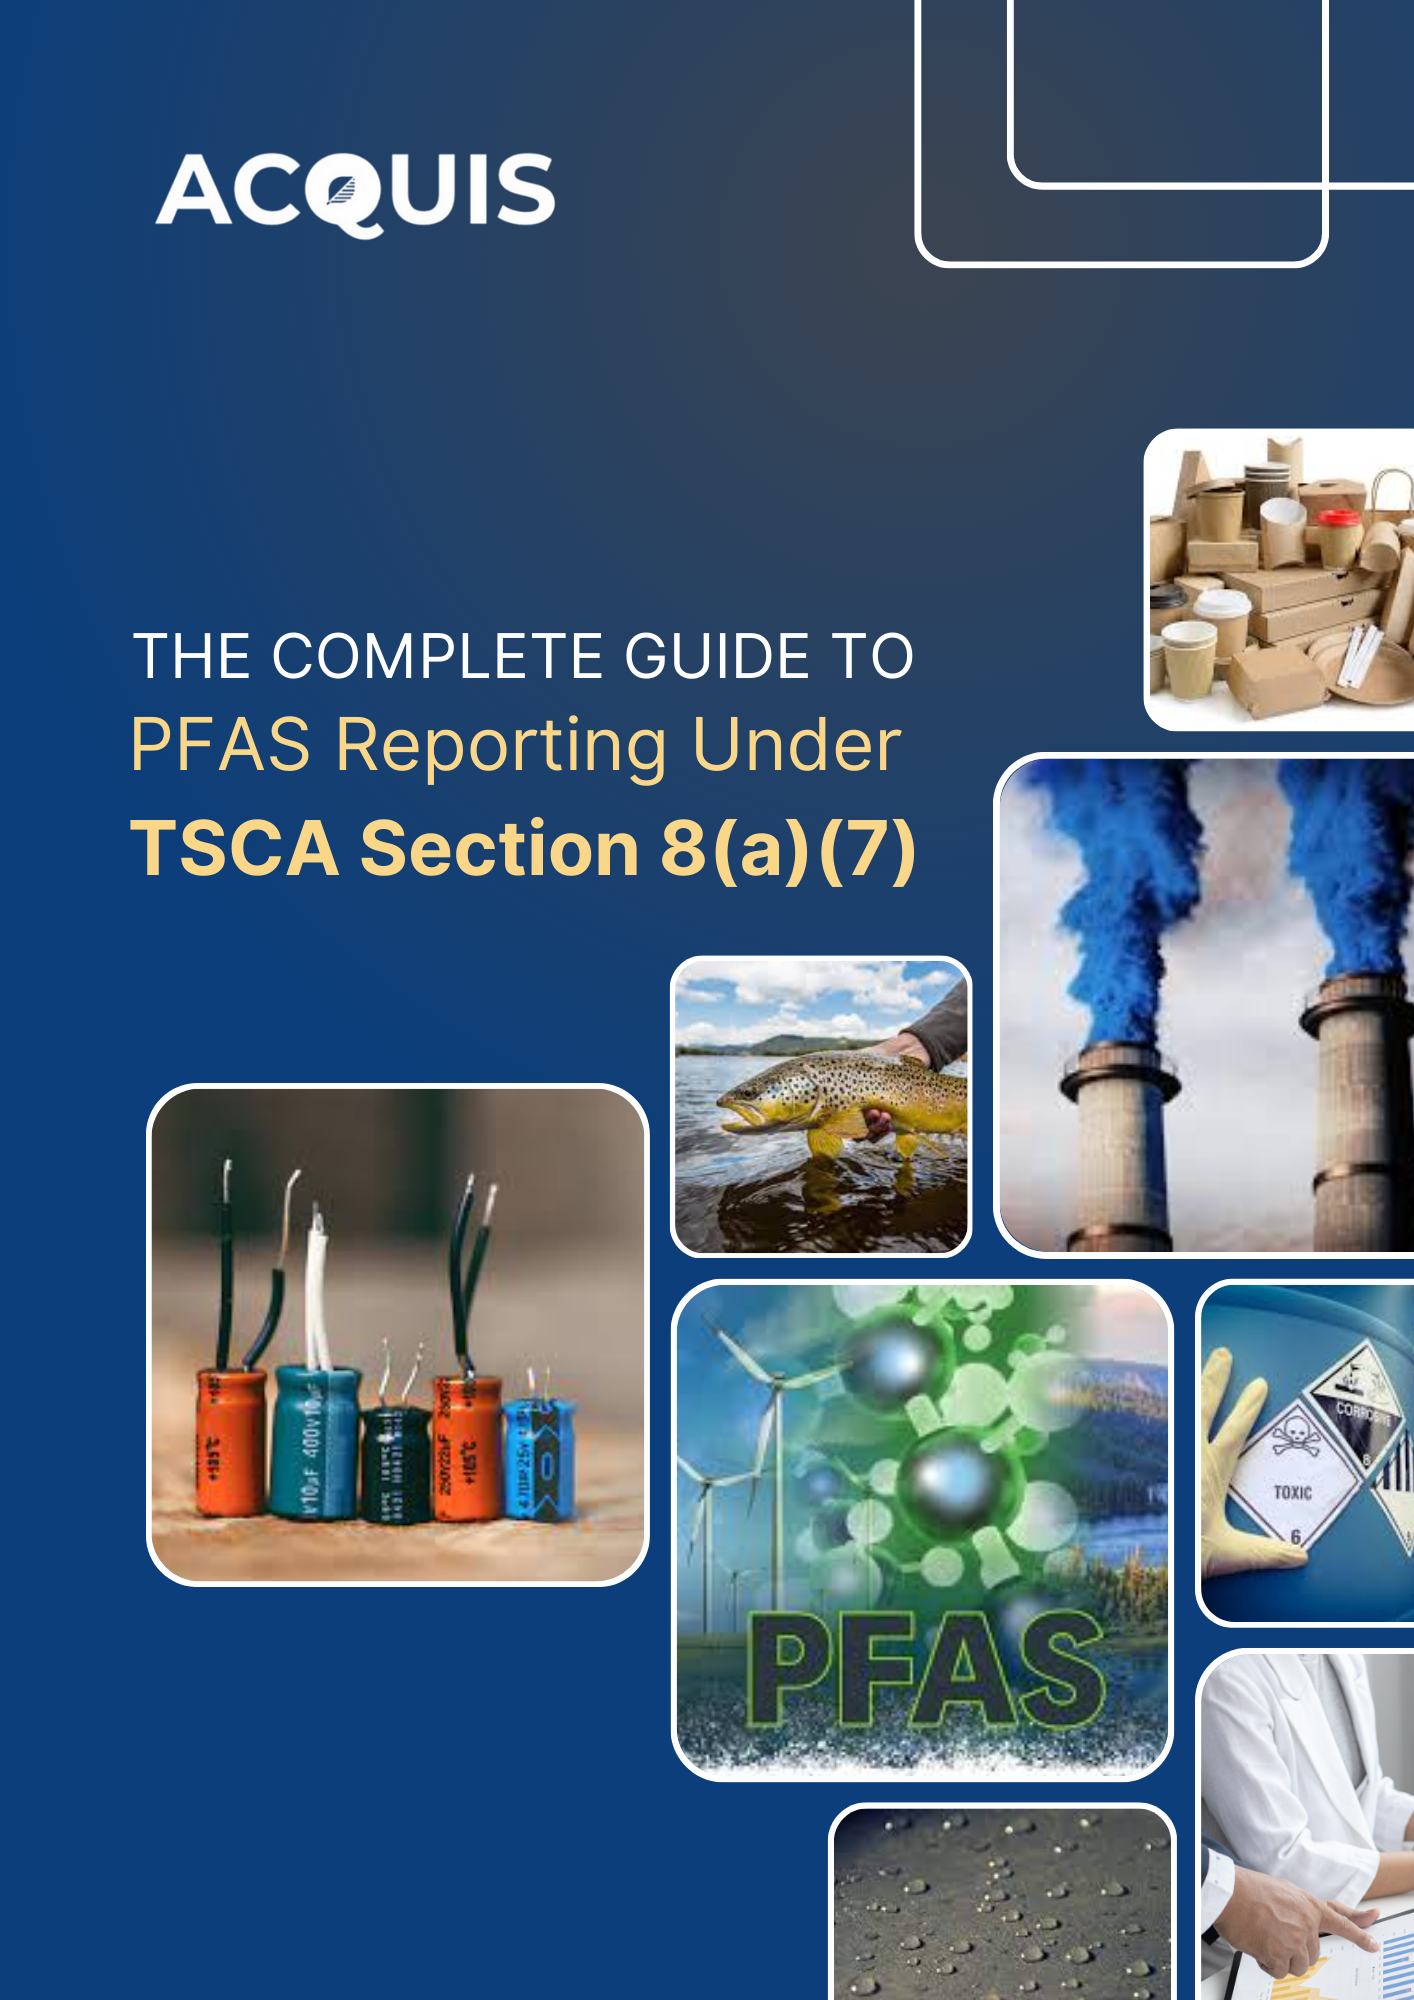 Get Your Hands on Our PFAS Reporting & Record Keeping Guide